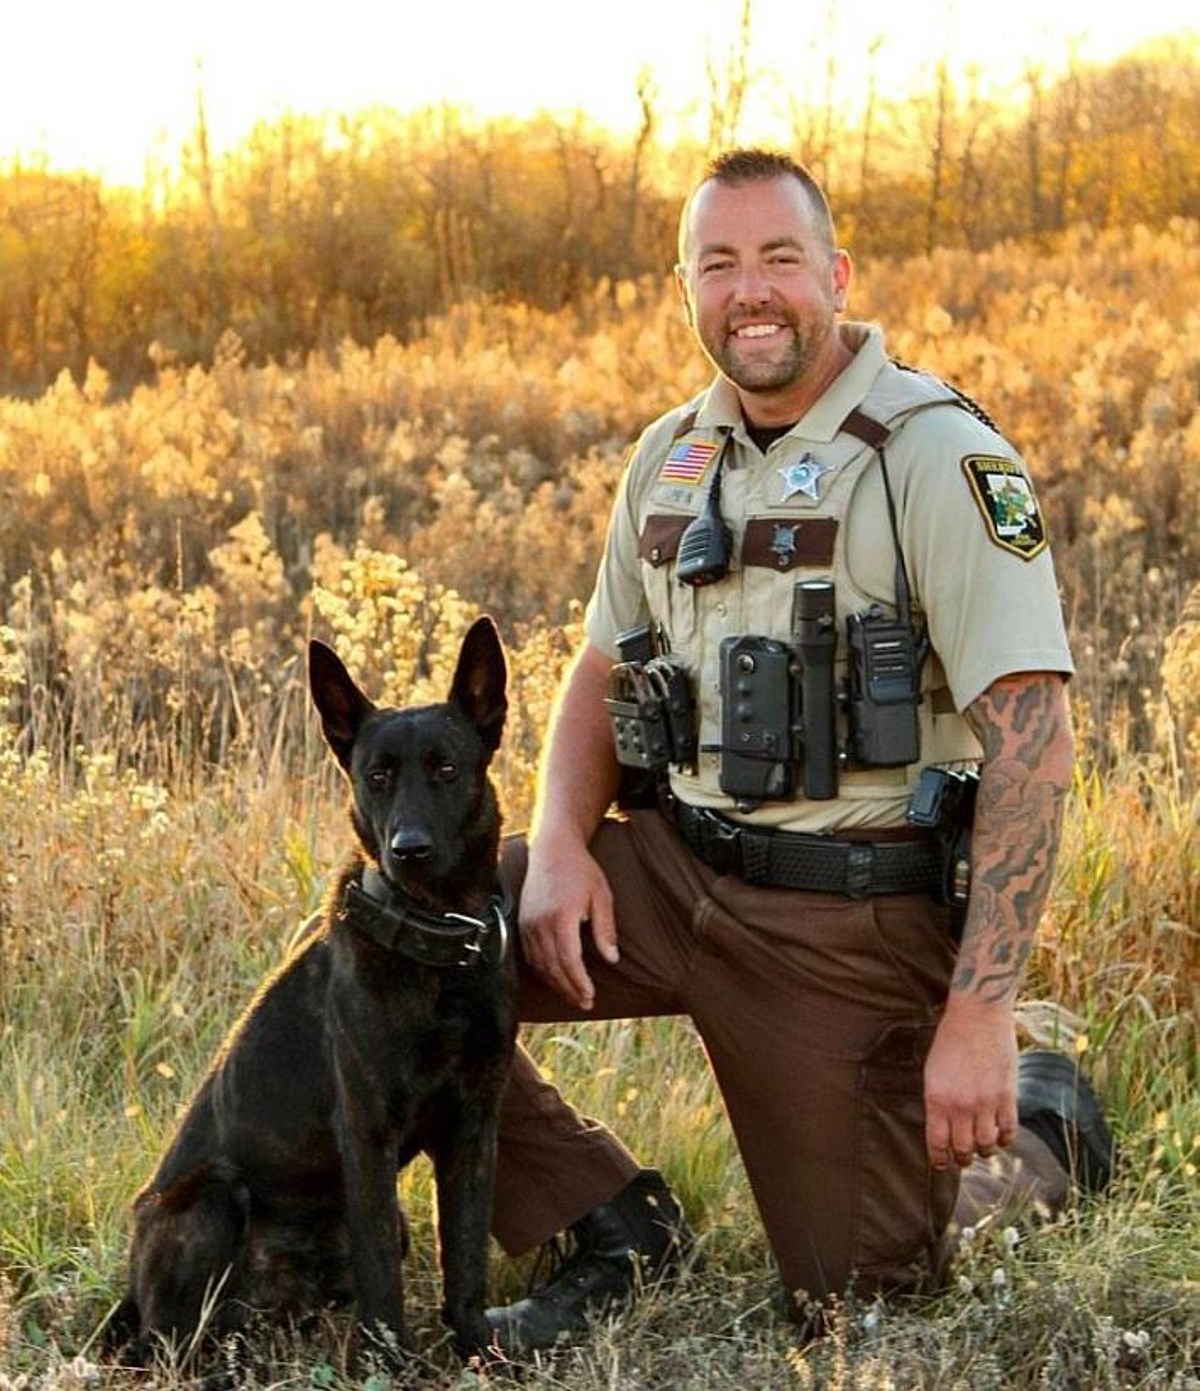 Pine County Suspect 'Immediately Gave Up' Once They Saw Police K9